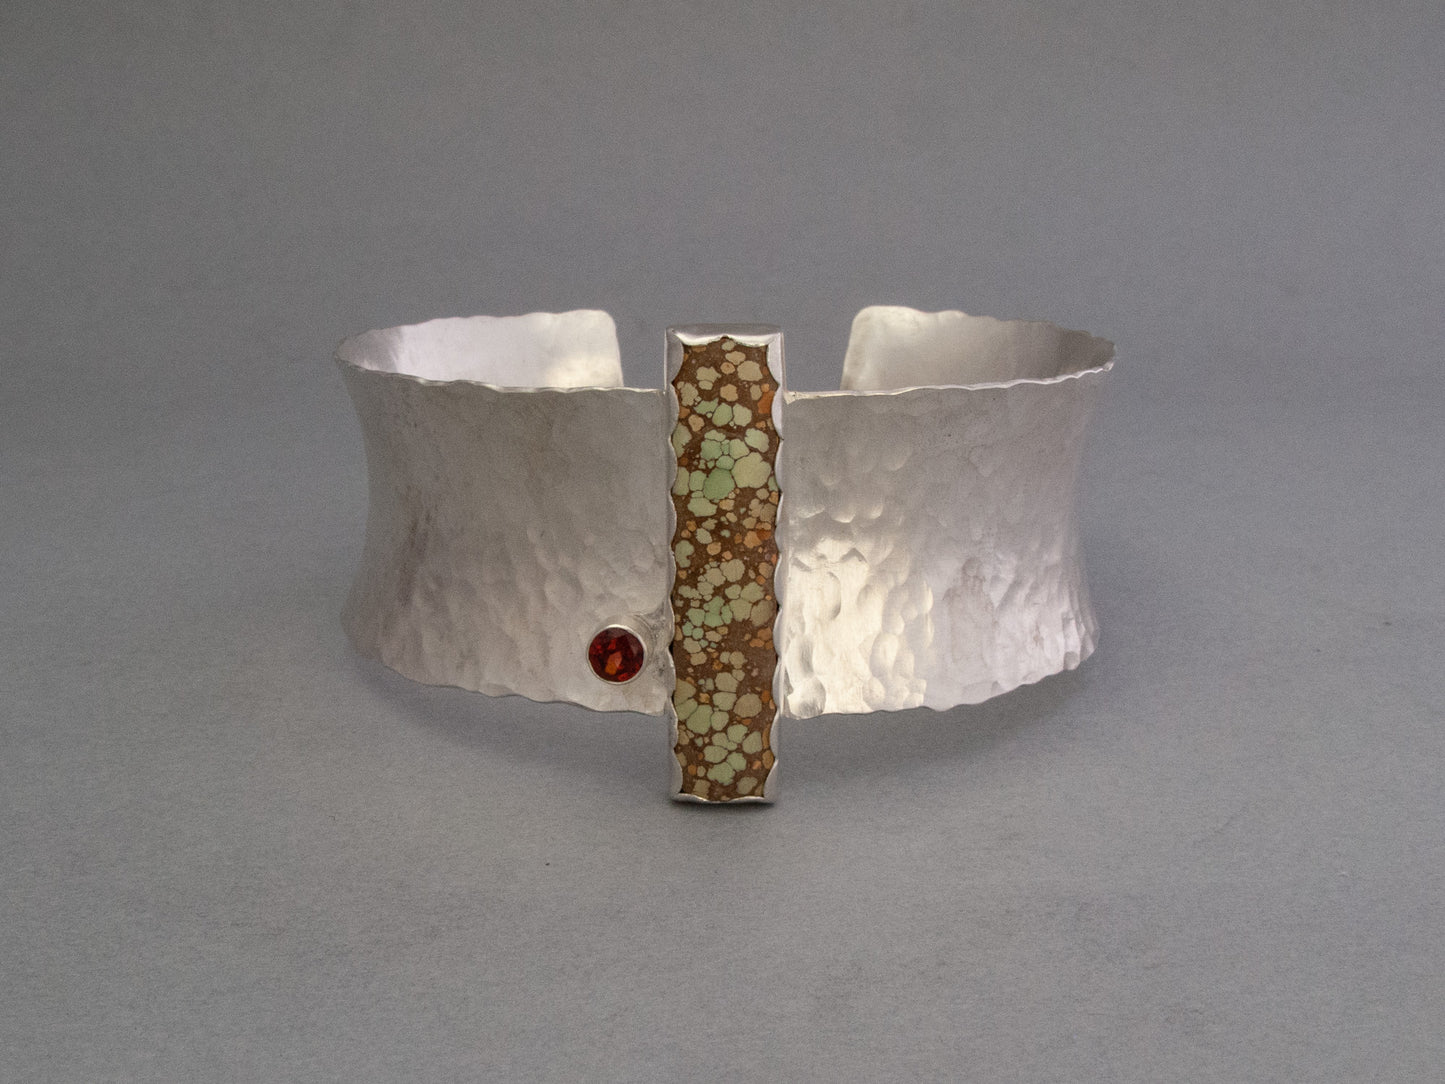 Hubei Turquoise and Garnet Statement Cuff Bracelet in Hammered Sterling Silver